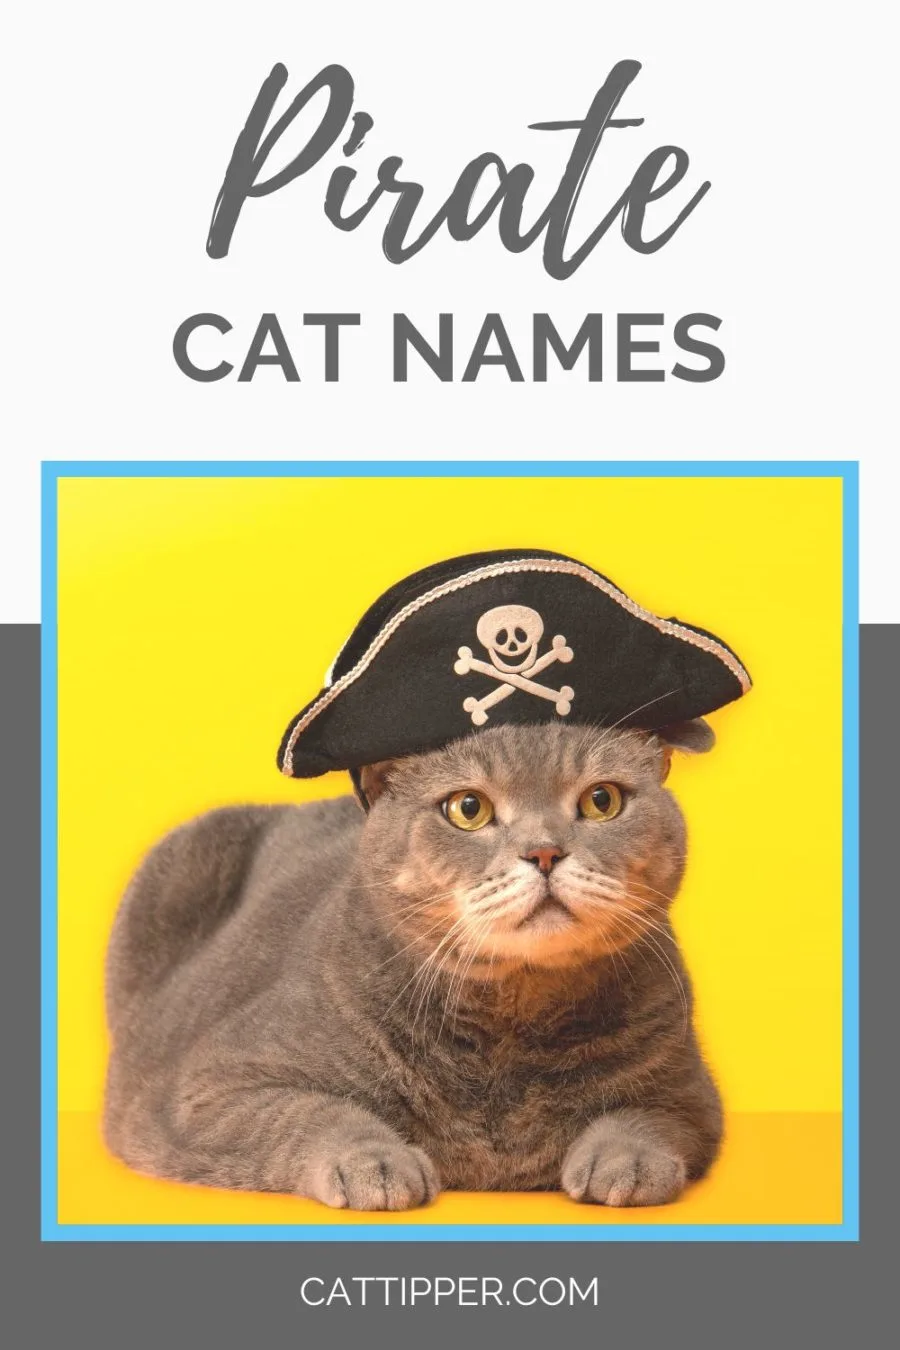 Pirate names for your cat or kitten